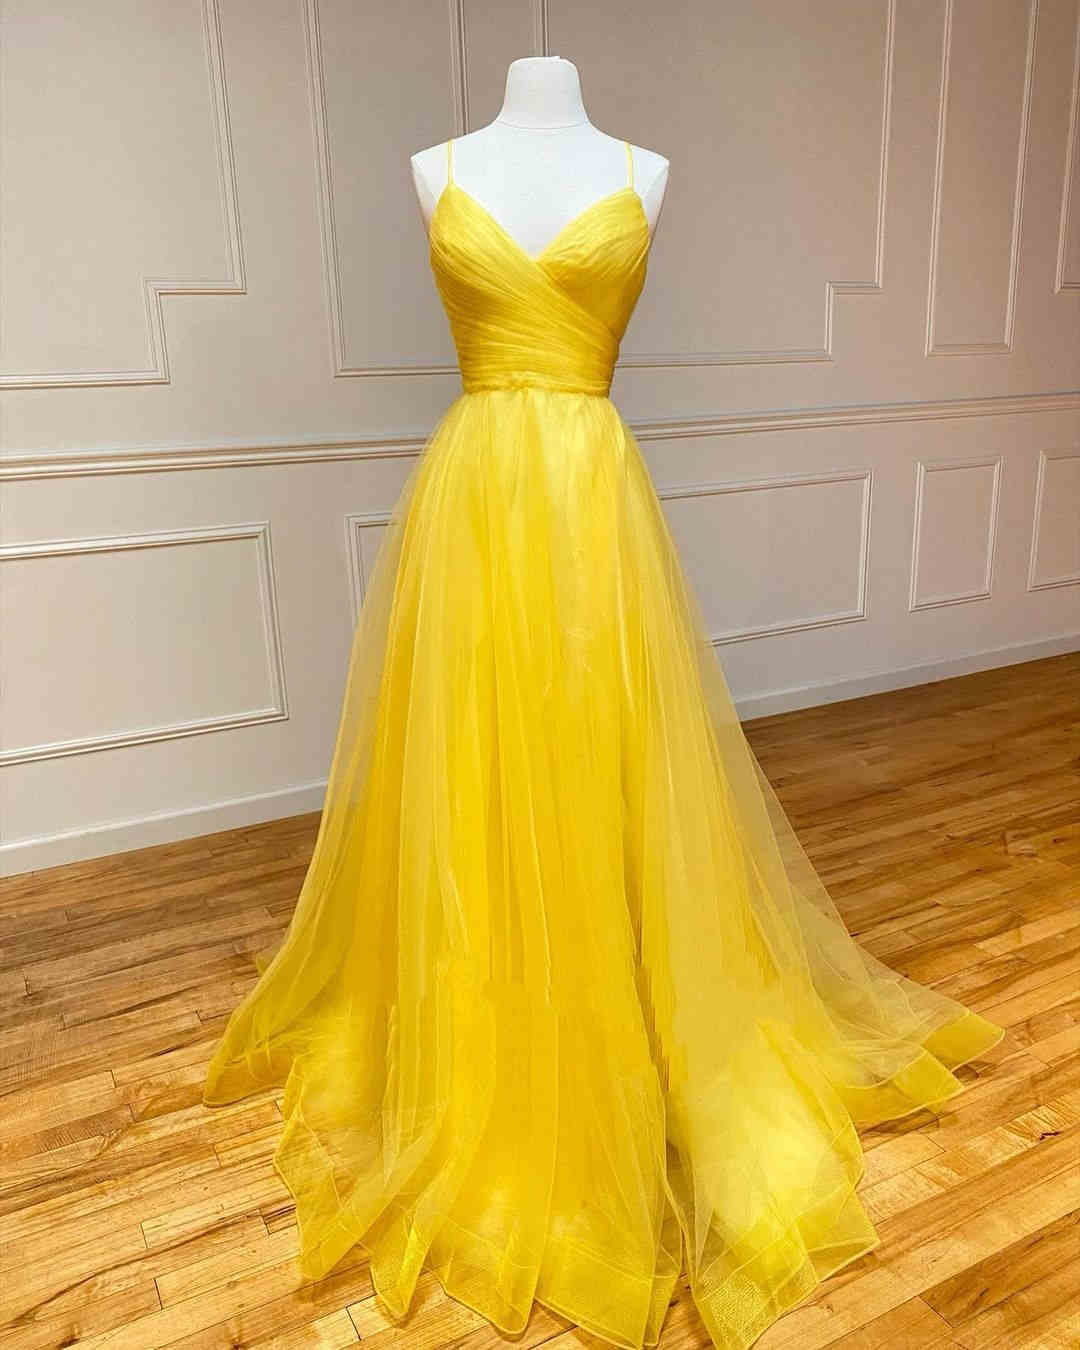 A-Line Straps Yellow Tulle Formal Dress?A-Line Straps Yellow Tulle Formal Dress?long dress,cheap dress,evening dress,bridal dress,prom dress 2021